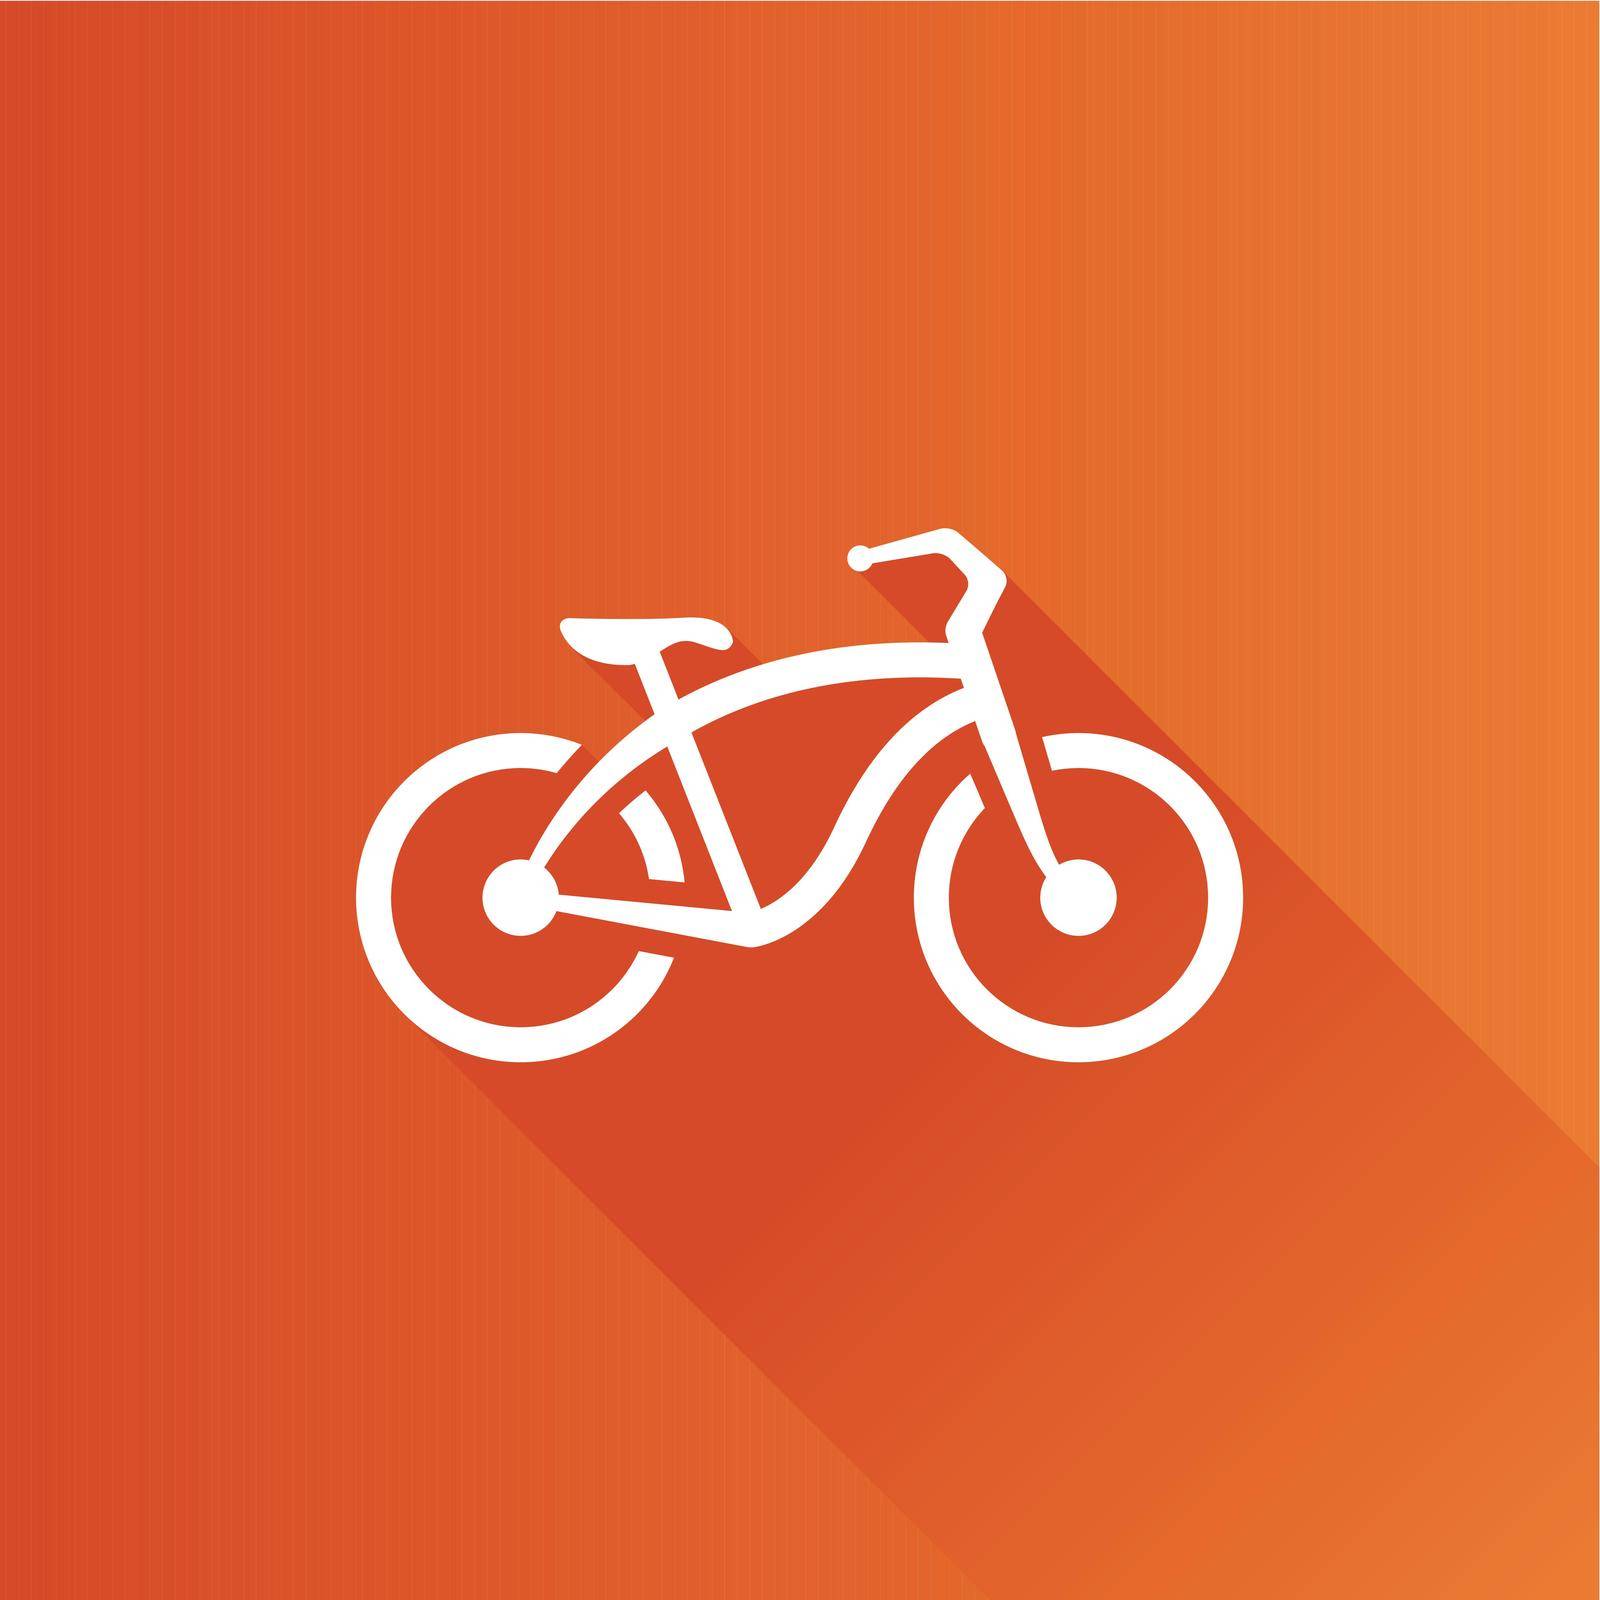 Low rider bicycle icon in Metro user interface color style. Sport urban transportation